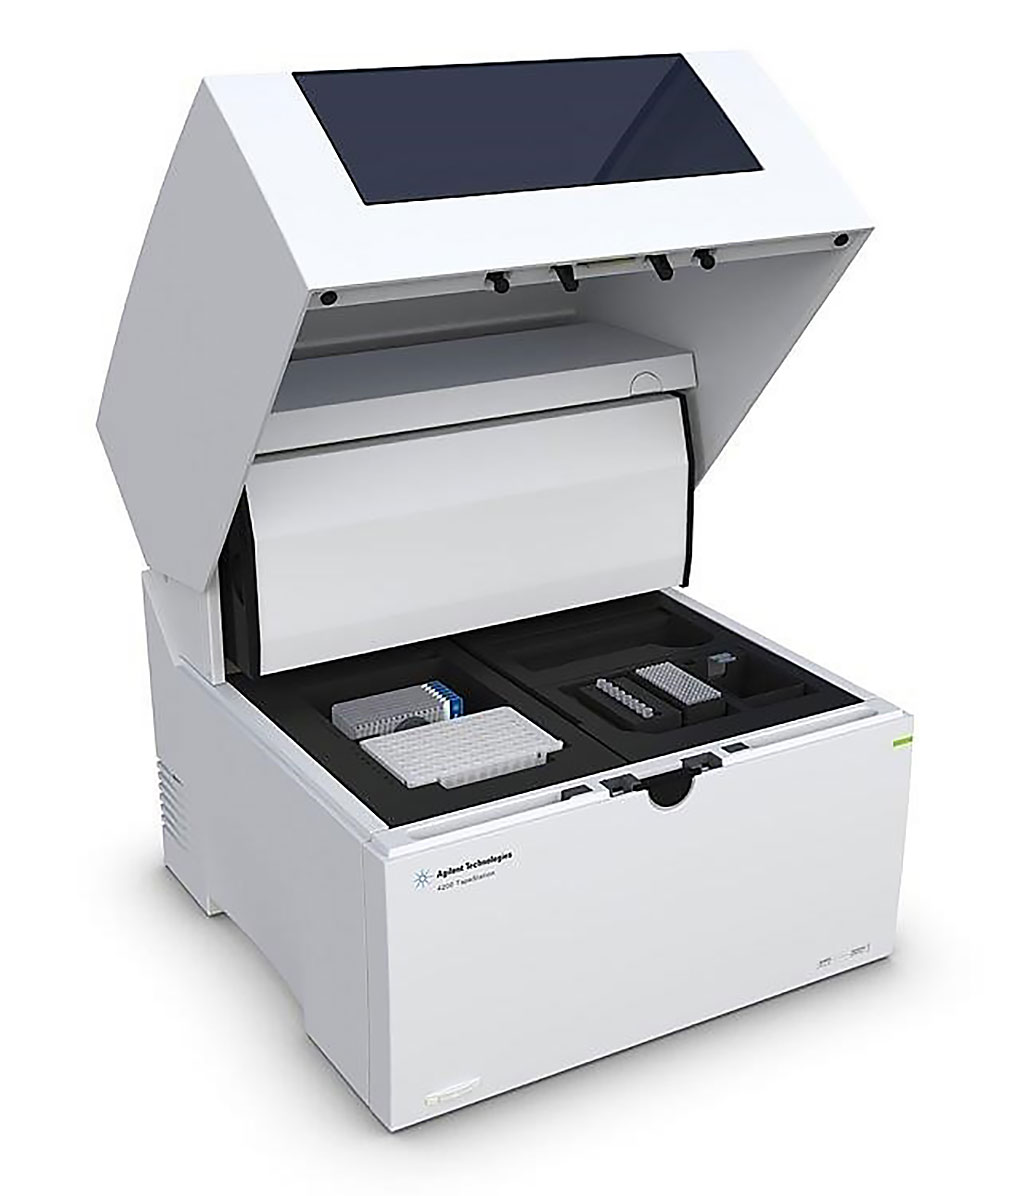 Image: The Agilent 4200 TapeStation system is an established automated electrophoresis tool for DNA and RNA sample quality control (Photo courtesy of Agilent Technologies).